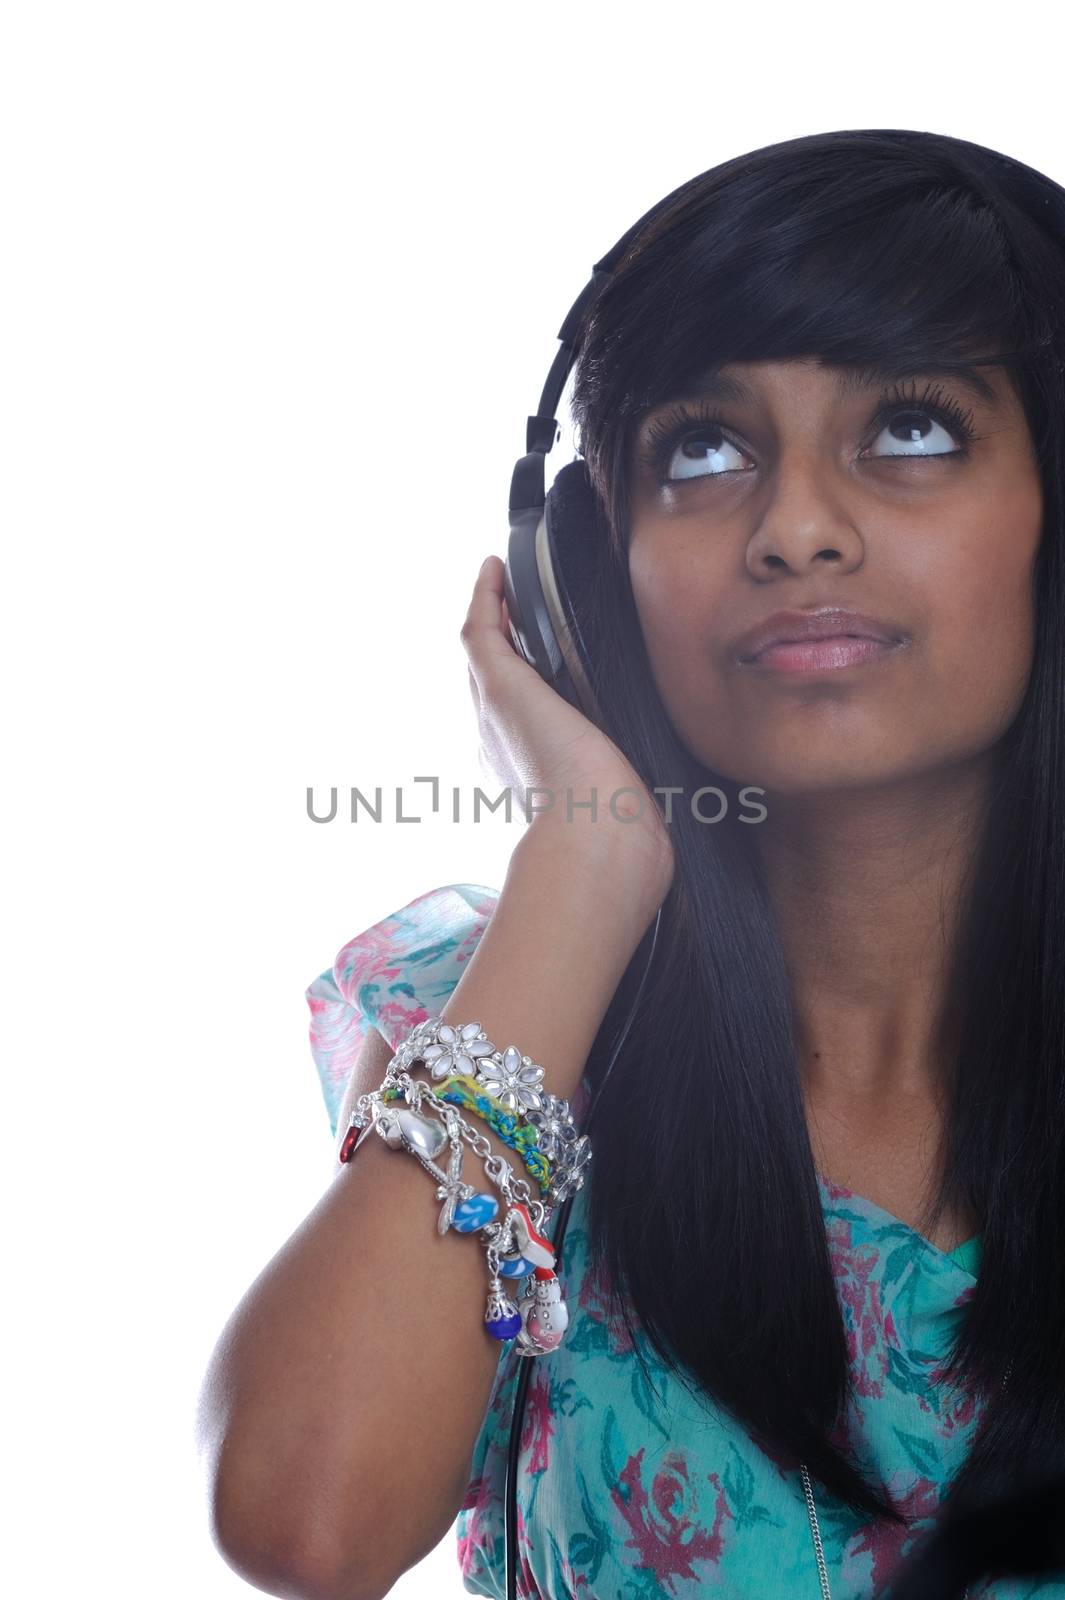 Teen girl from india listens to music